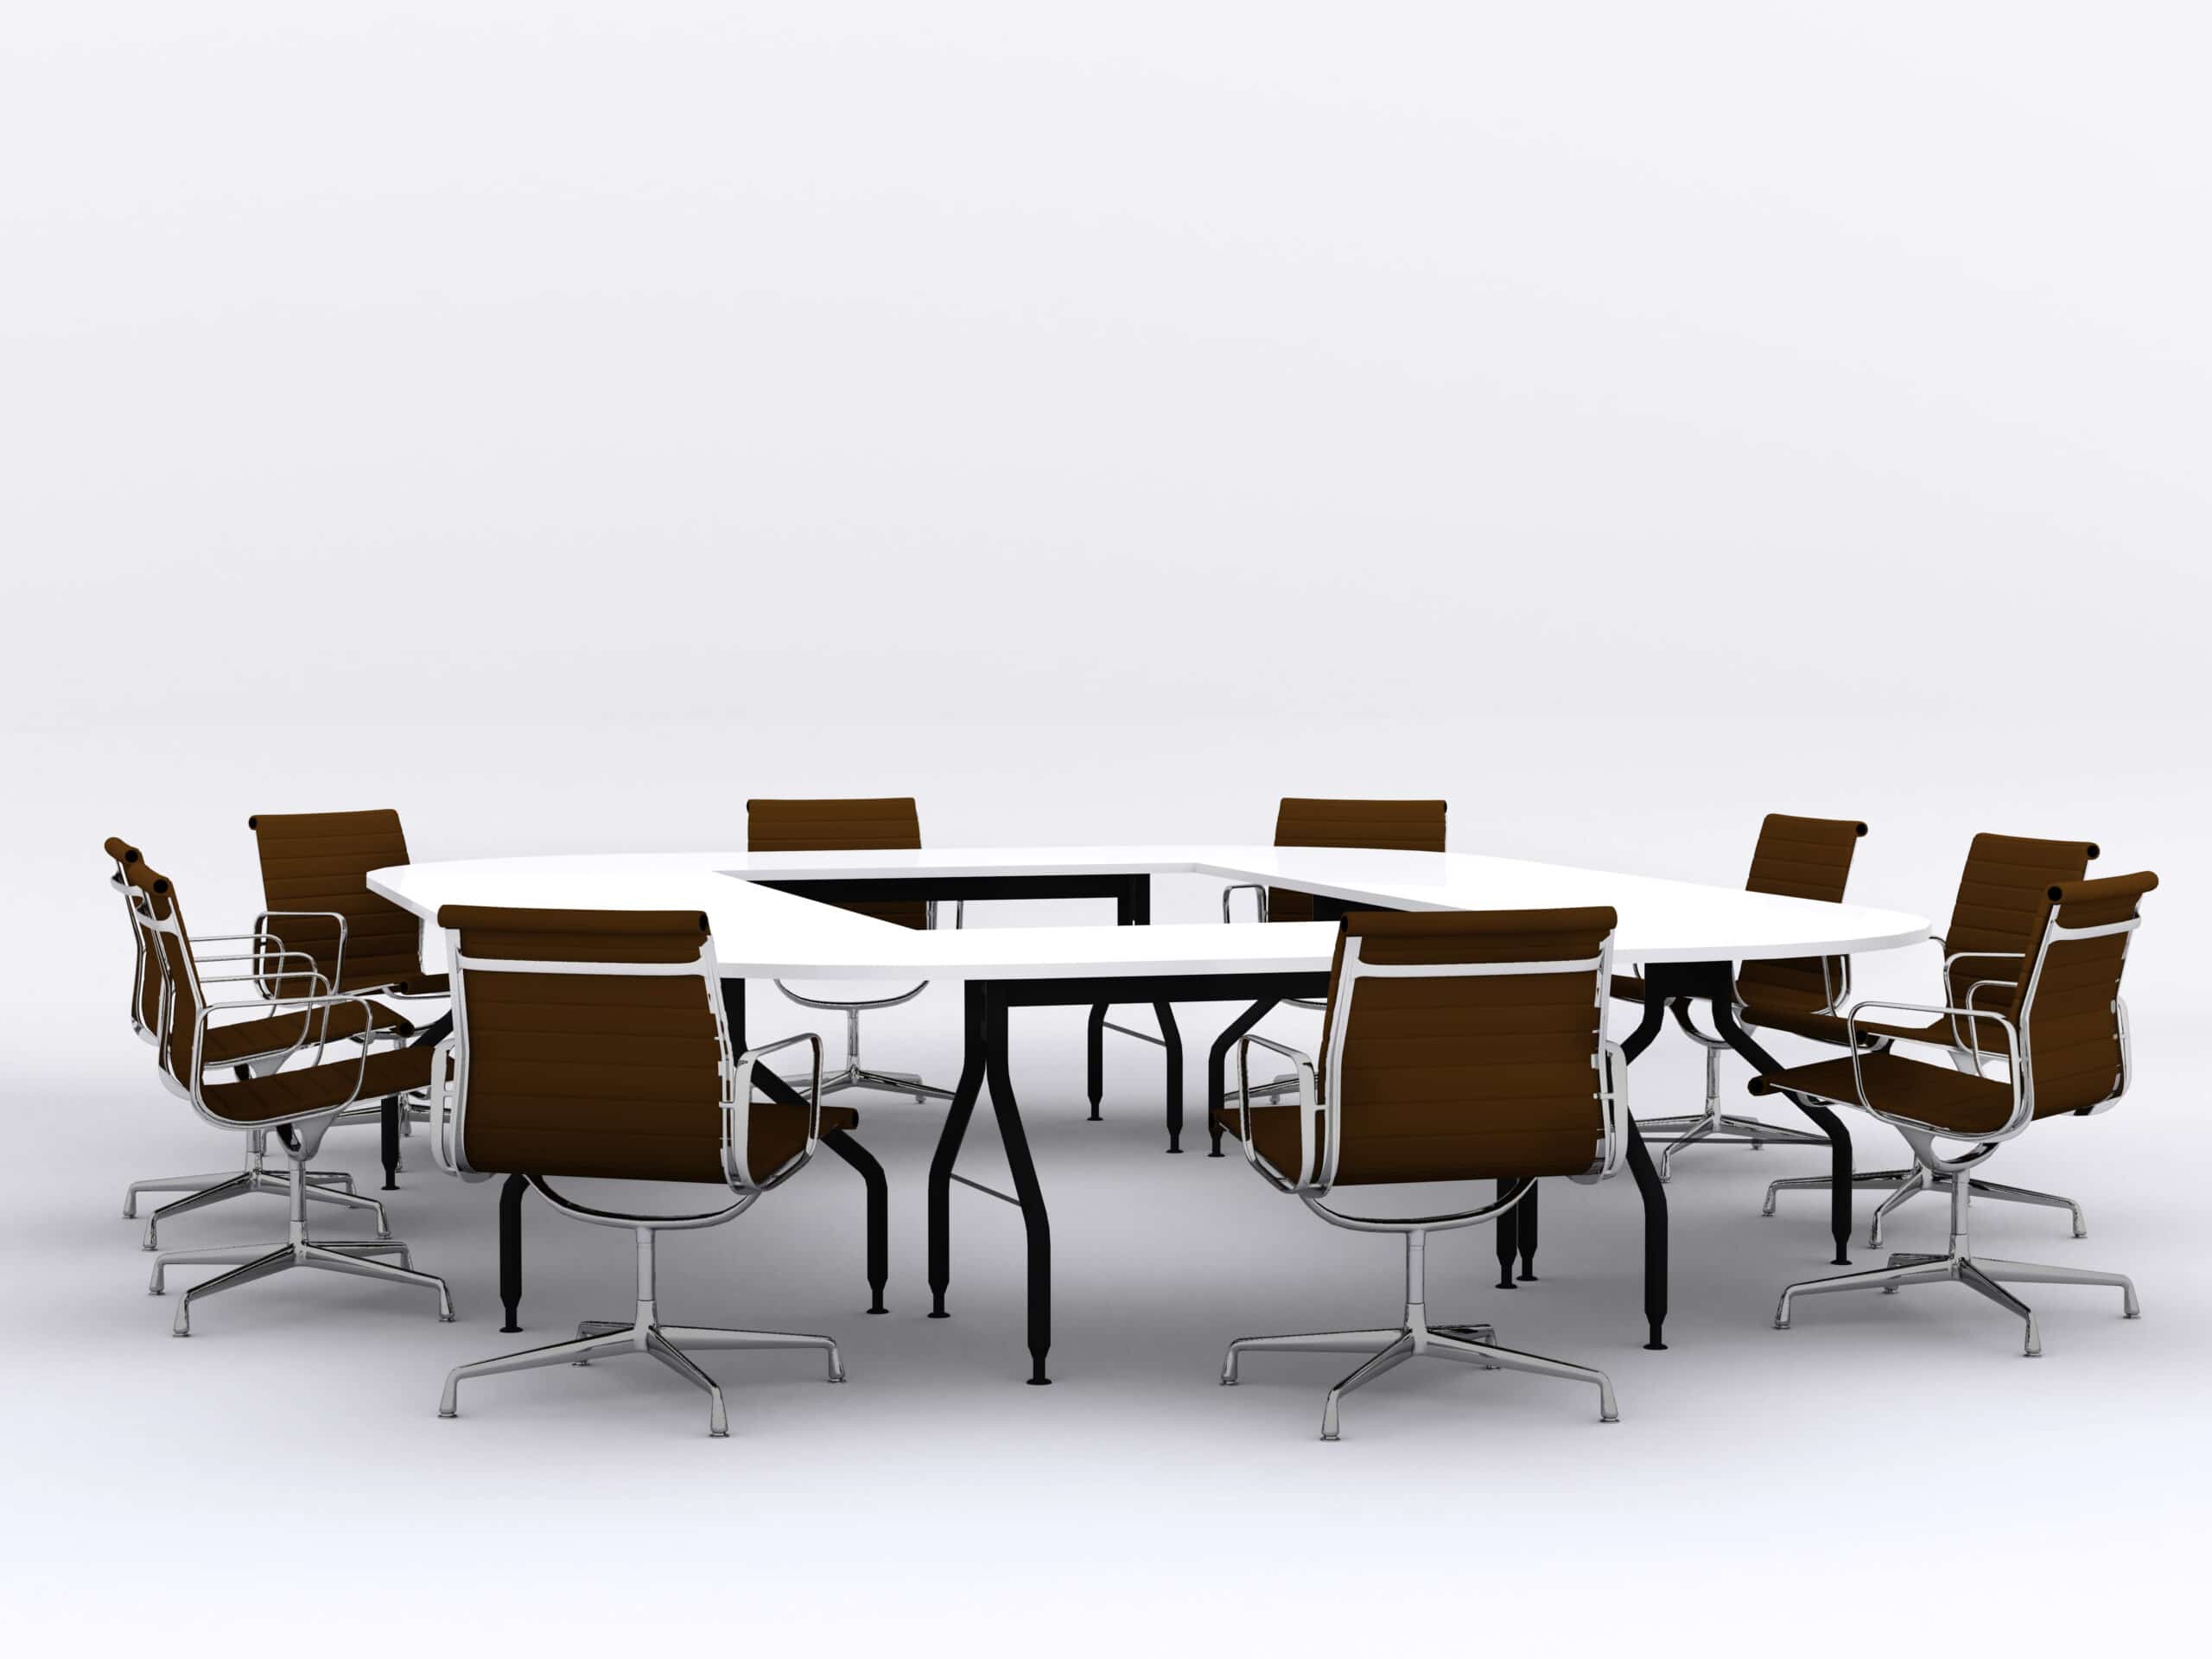 Render of collaborative Conference table built with employee engagement in-mind